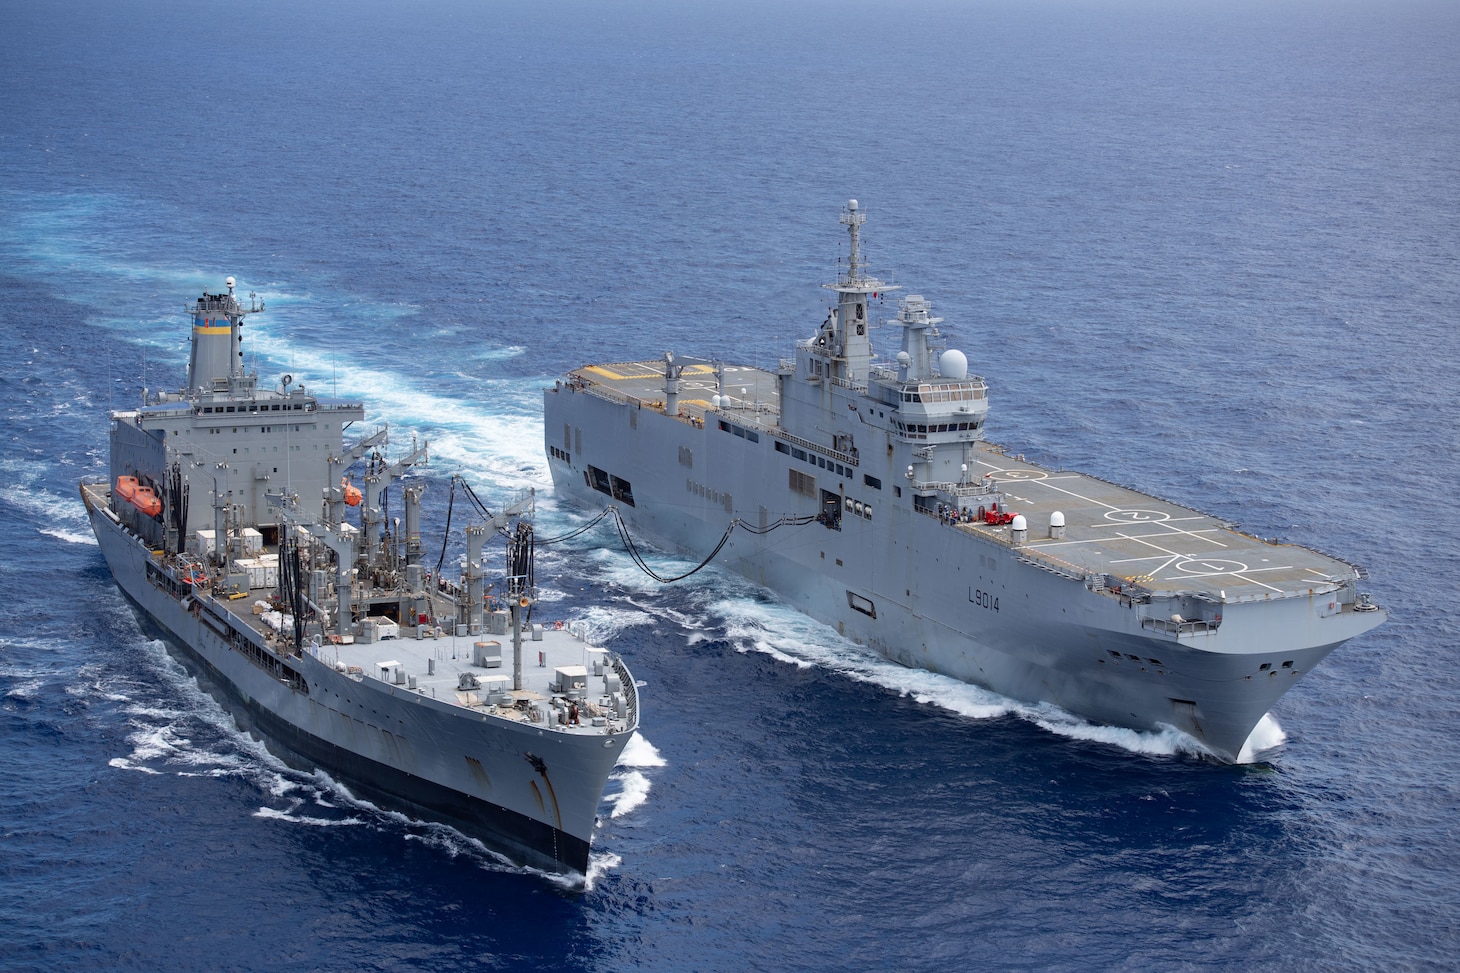 PHILIPPINE SEA (May 19, 2021) - The U.S. Navy's fleet replenishment oiler USNS Big Horn (T-AOE 6), left, conducts an underway replenishment with the French Navy's amphibious assault ship FS Tonnerre (L 9014). (Photo courtesy of the French Navy)